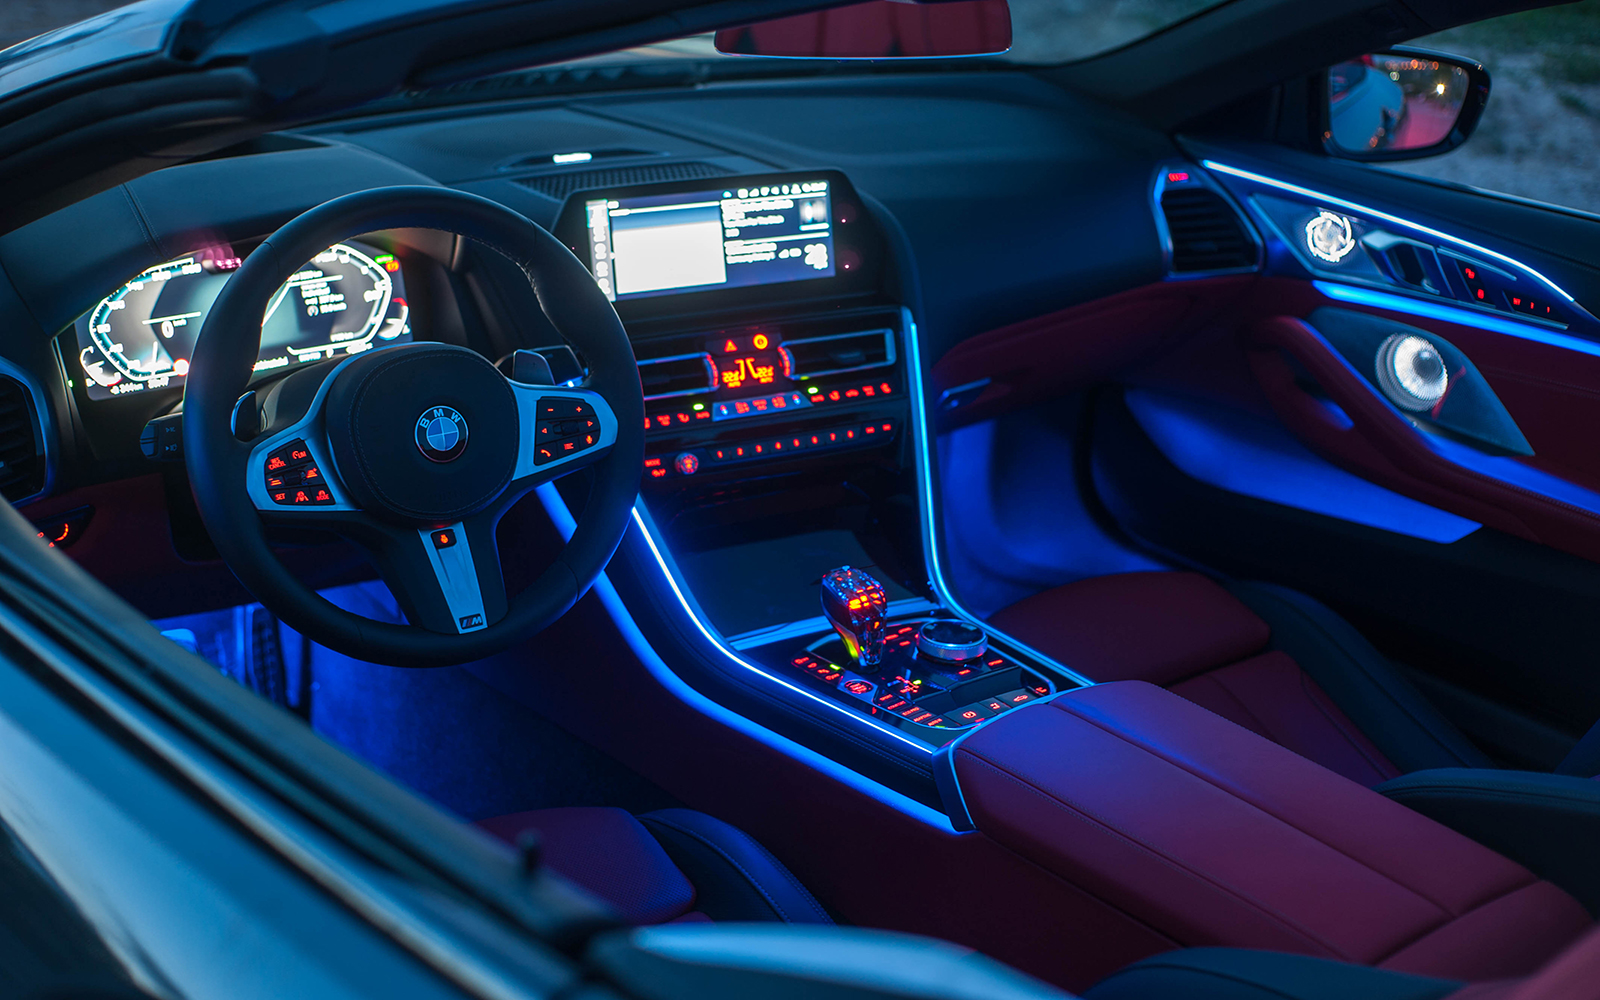 Concepts of car interiors evolve, but only details and applied materials are changed in fact.